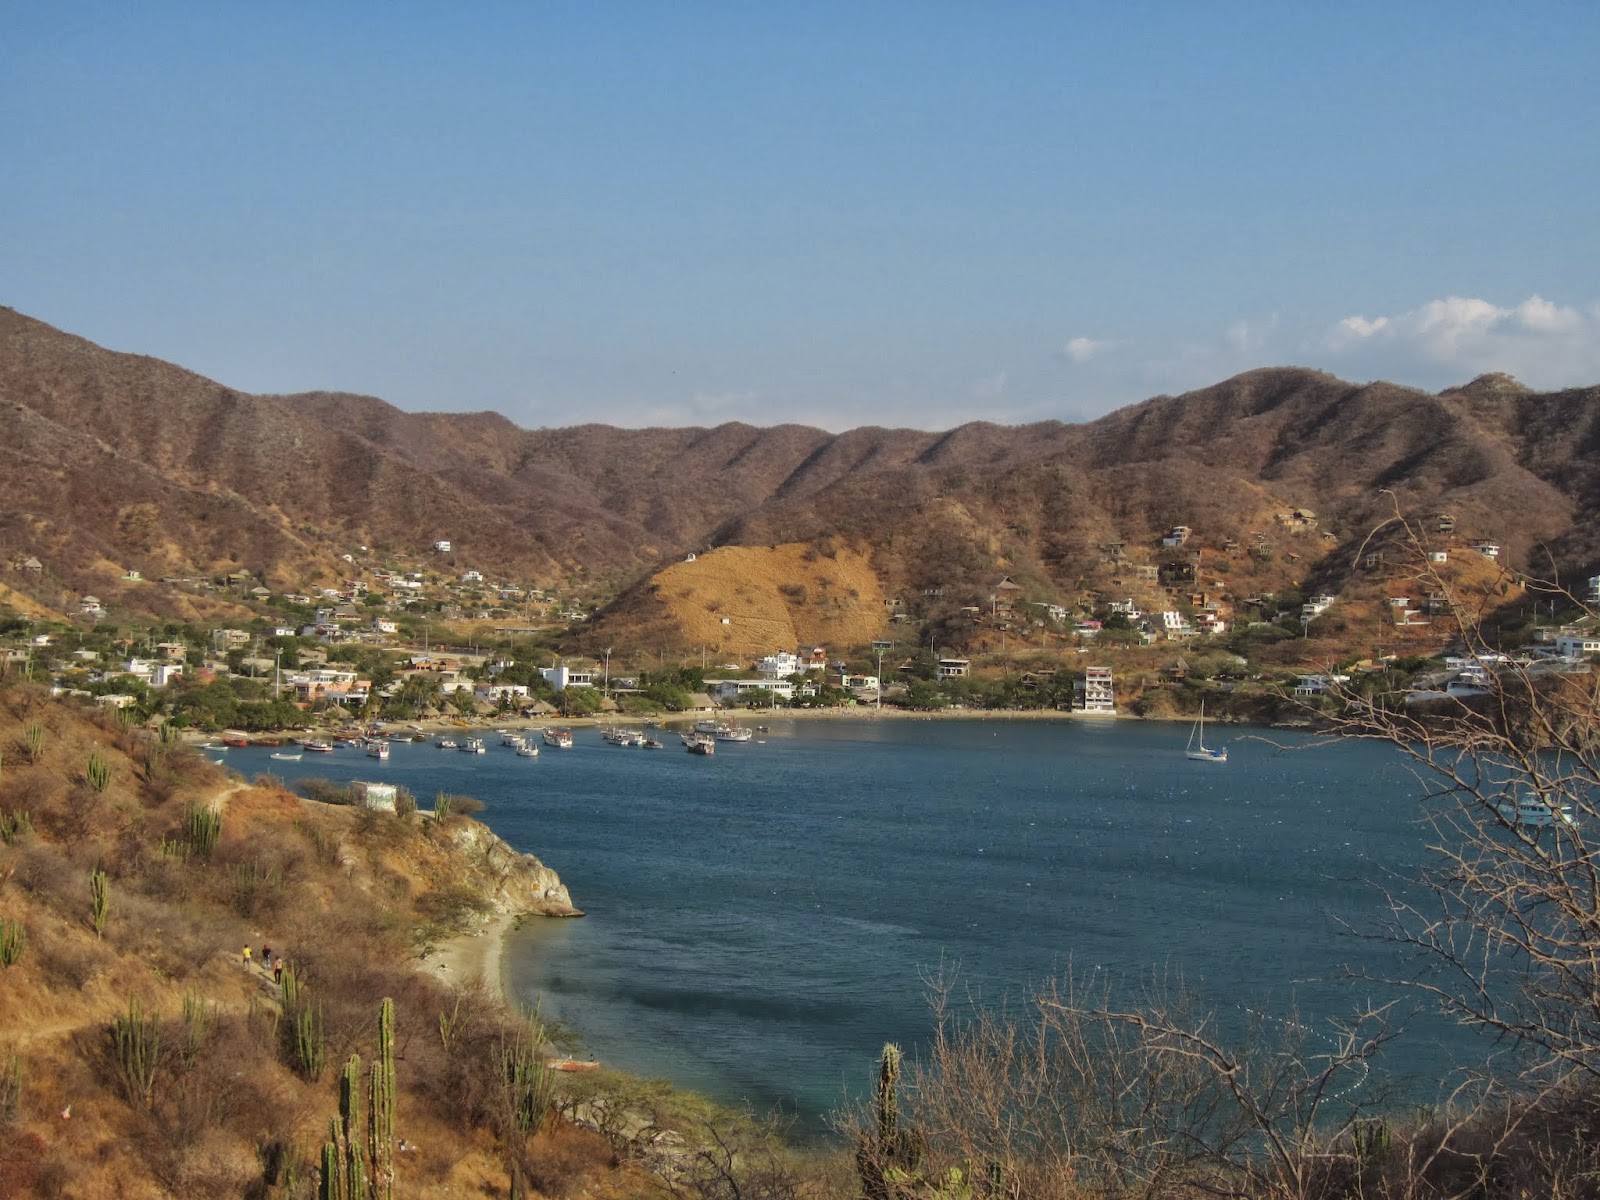 View of Taganga from our hike.